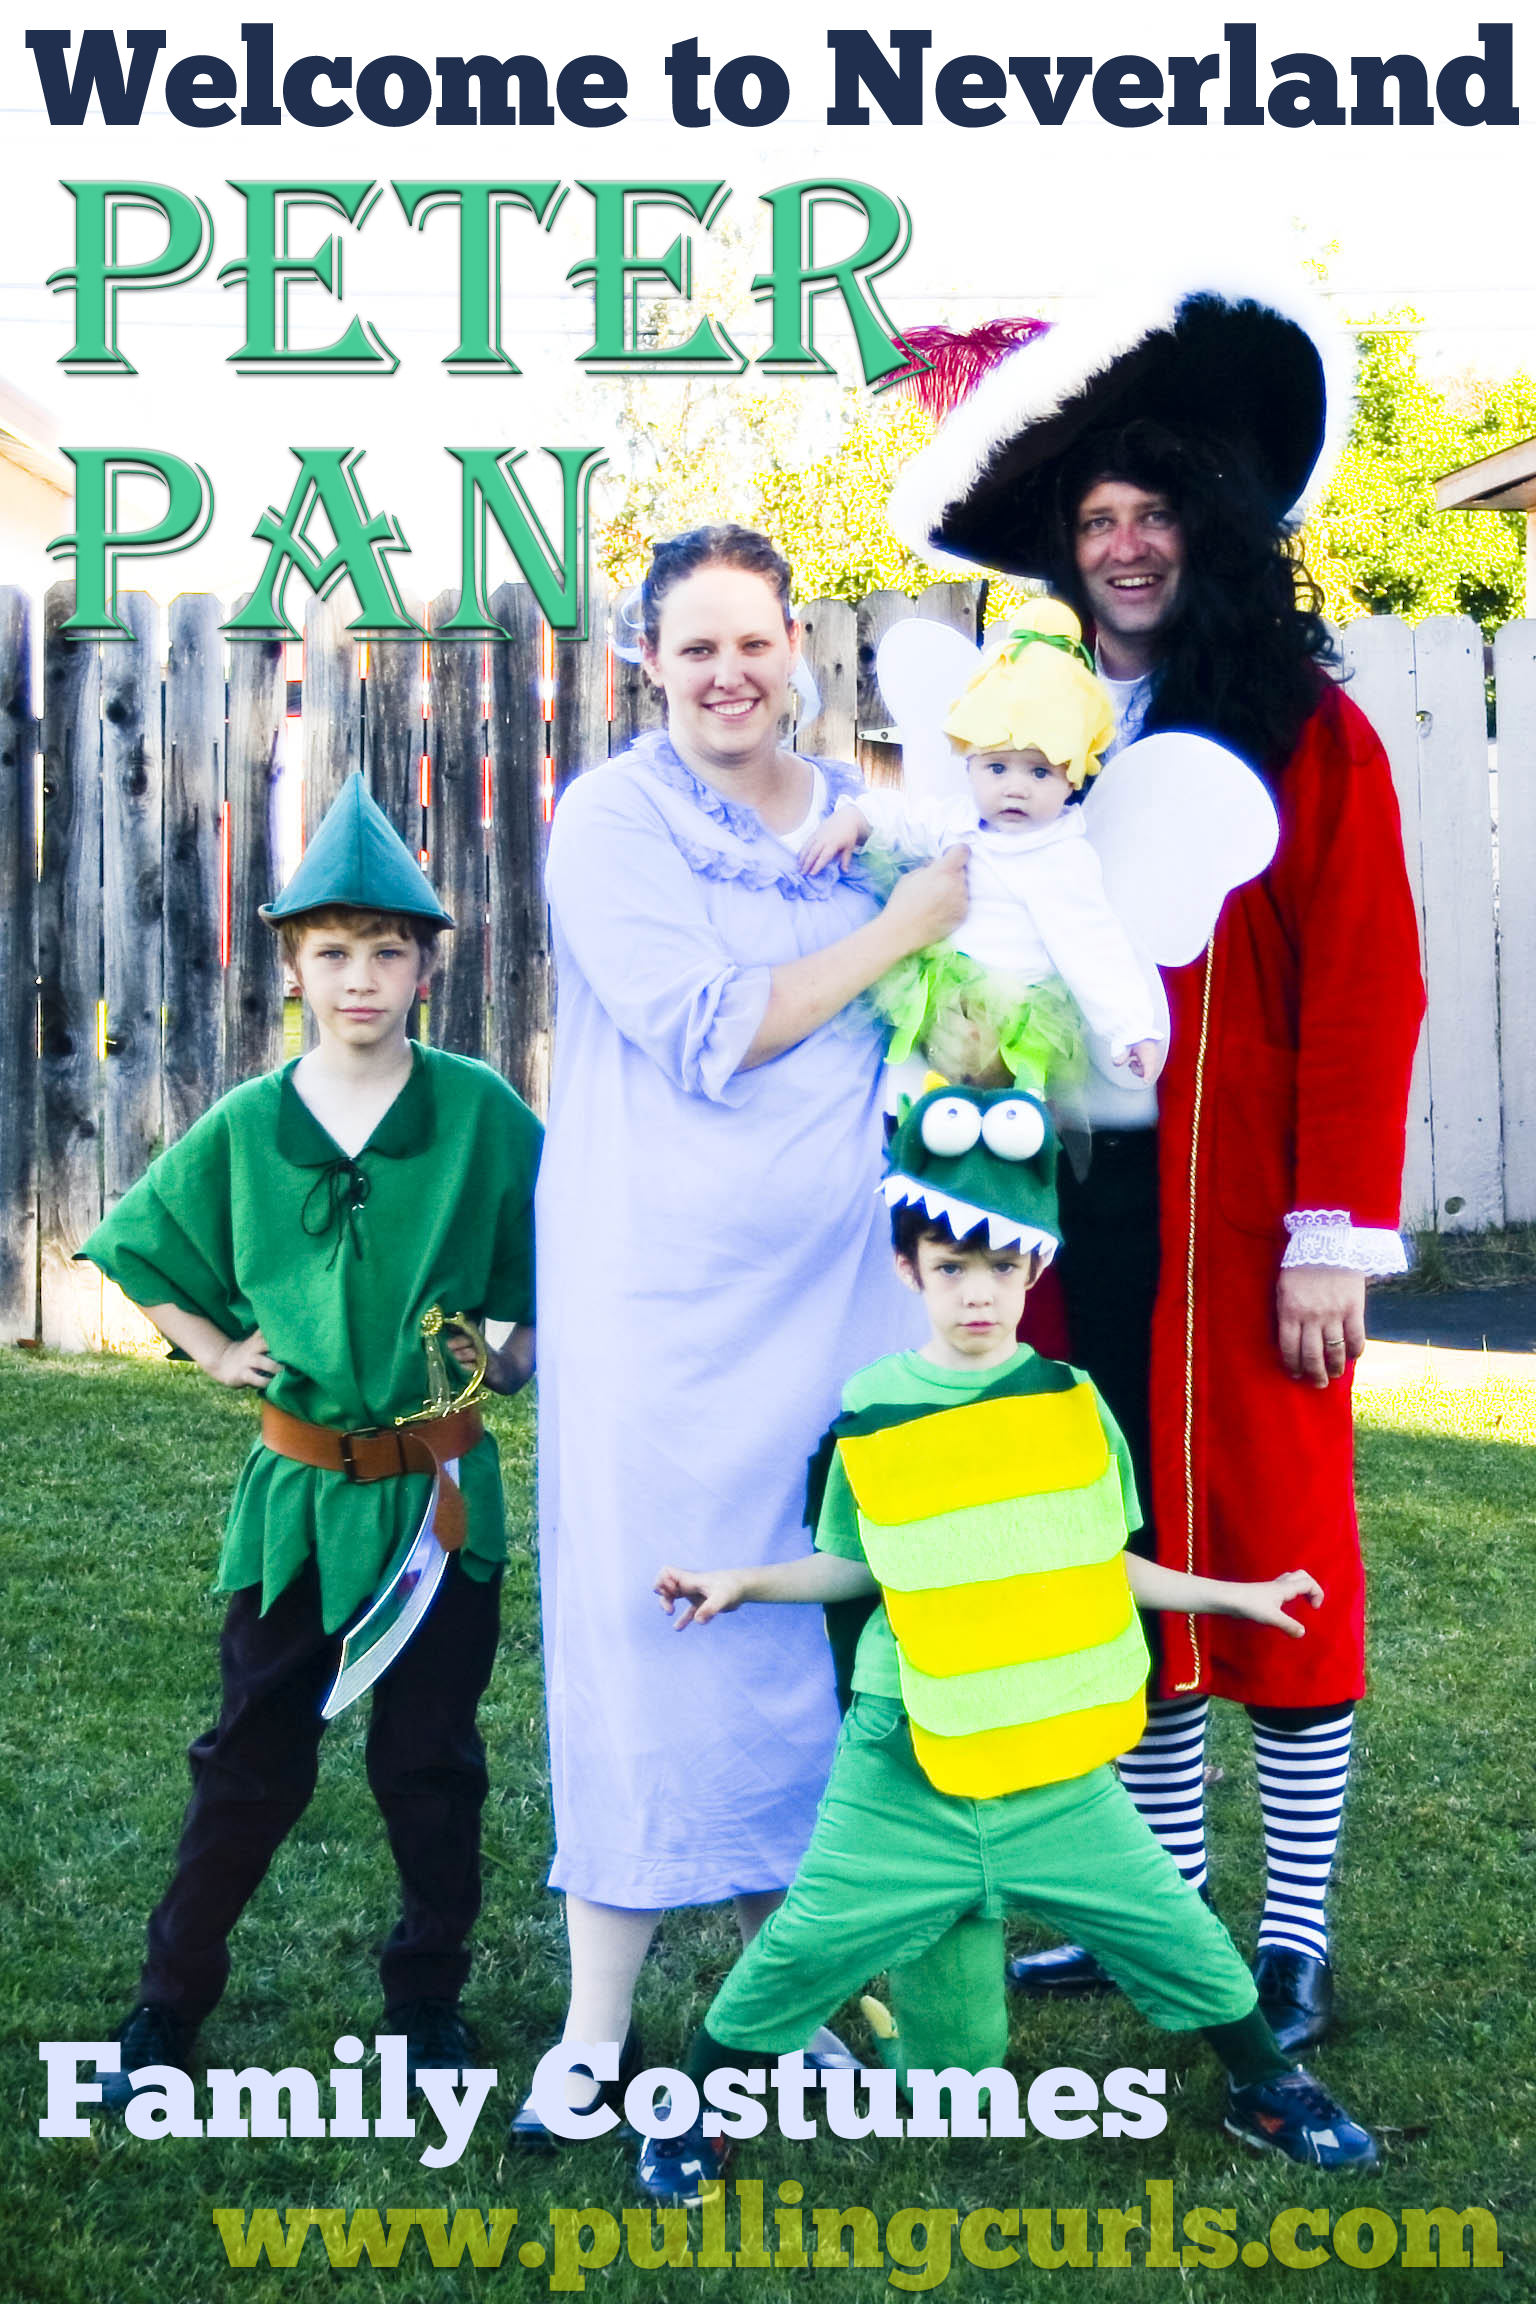 Peter Pan Family Costumes allows a lot of different and fun characters for each member of your family! #HalloweenCostumes #PeterPan